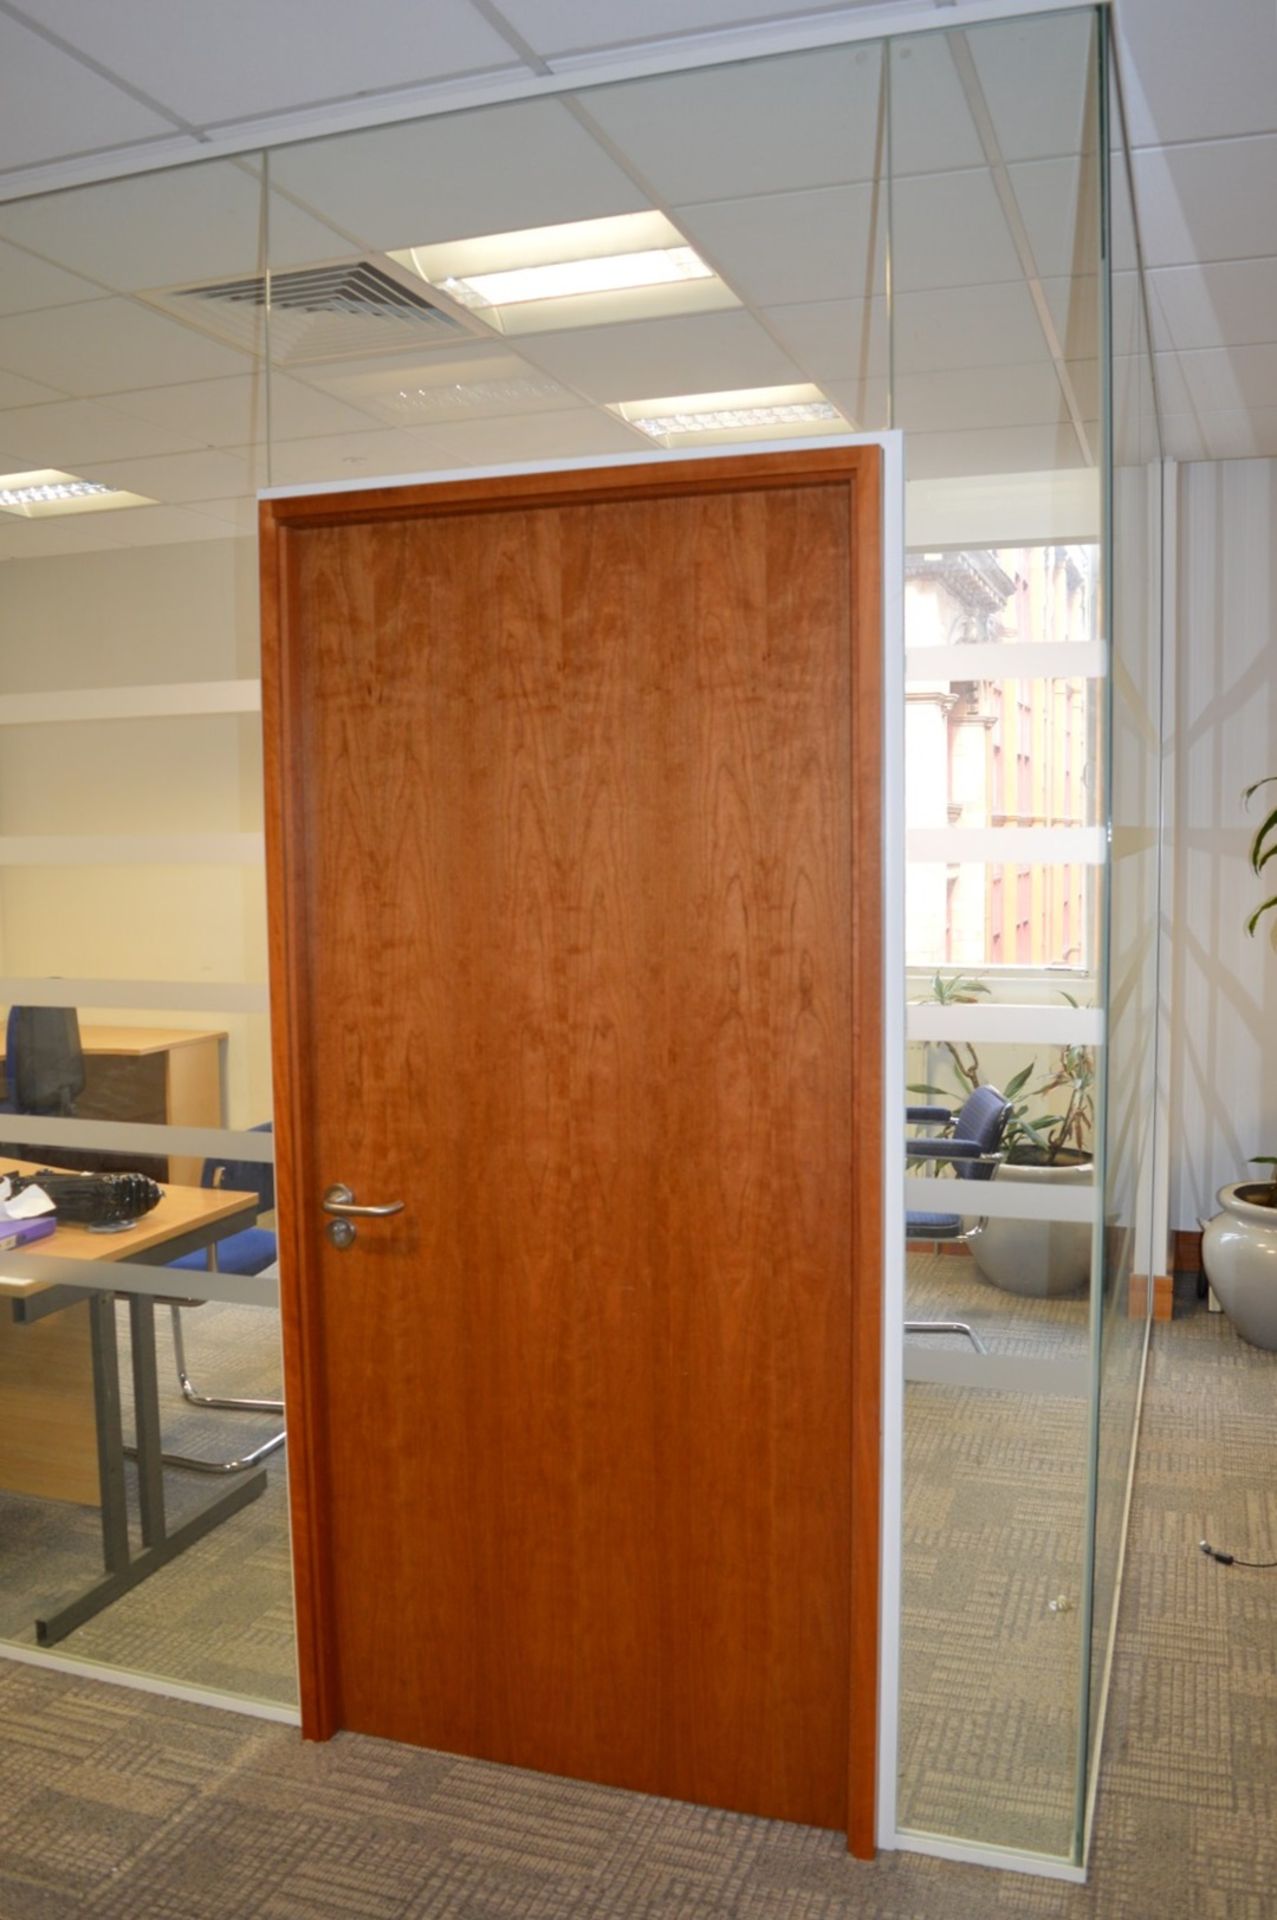 1 x Frameless Glass Partition Corner Office - Perfect For Creating a Contemporary Office Space in - Image 4 of 12